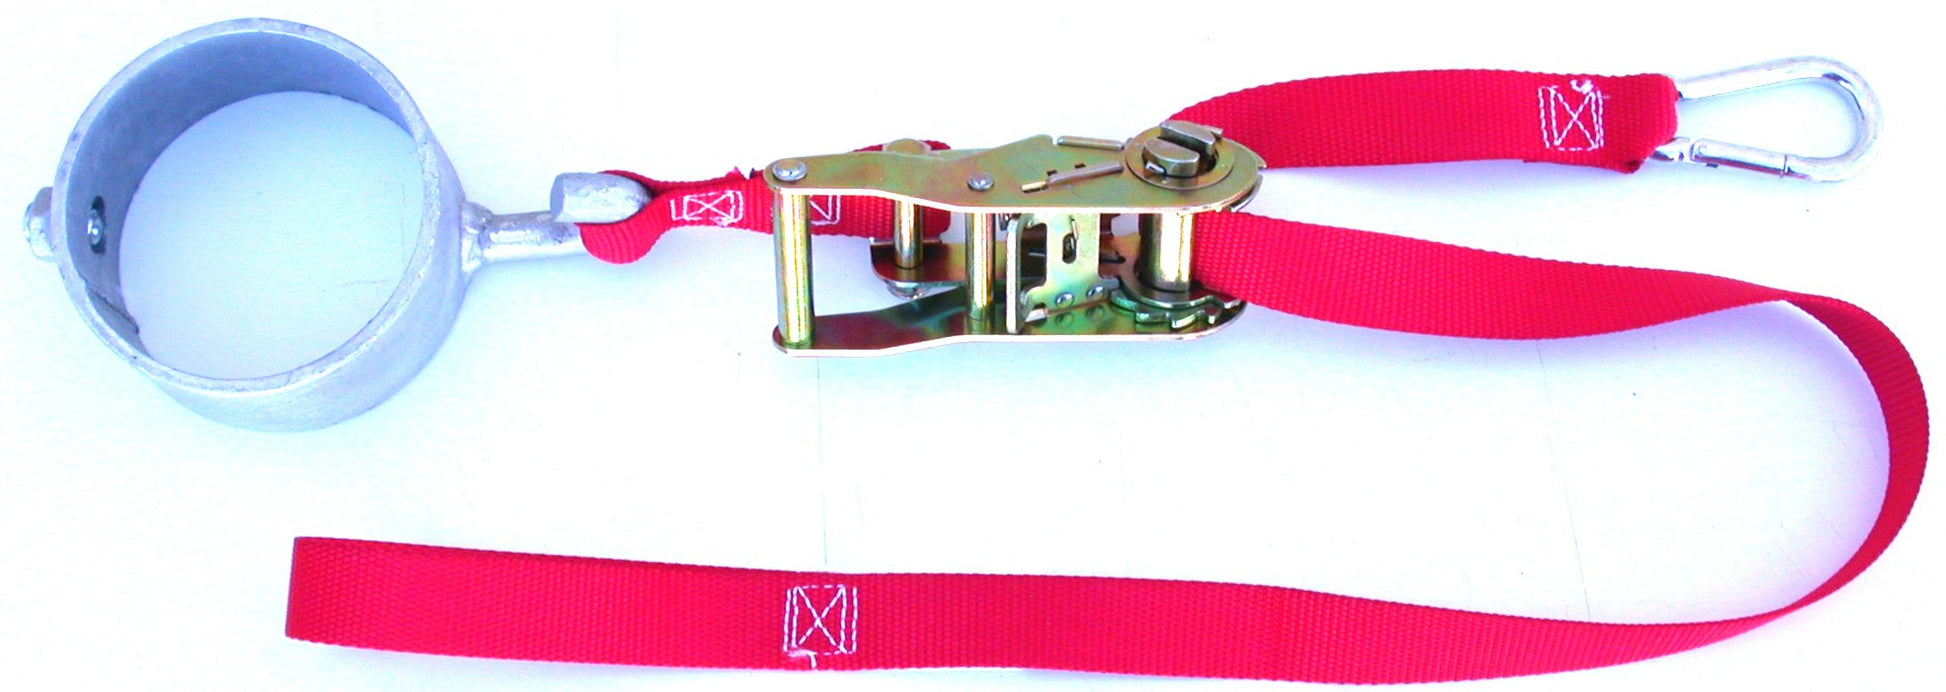 8LHLS-1-inch red web loop style ratchet-buckle pole strap